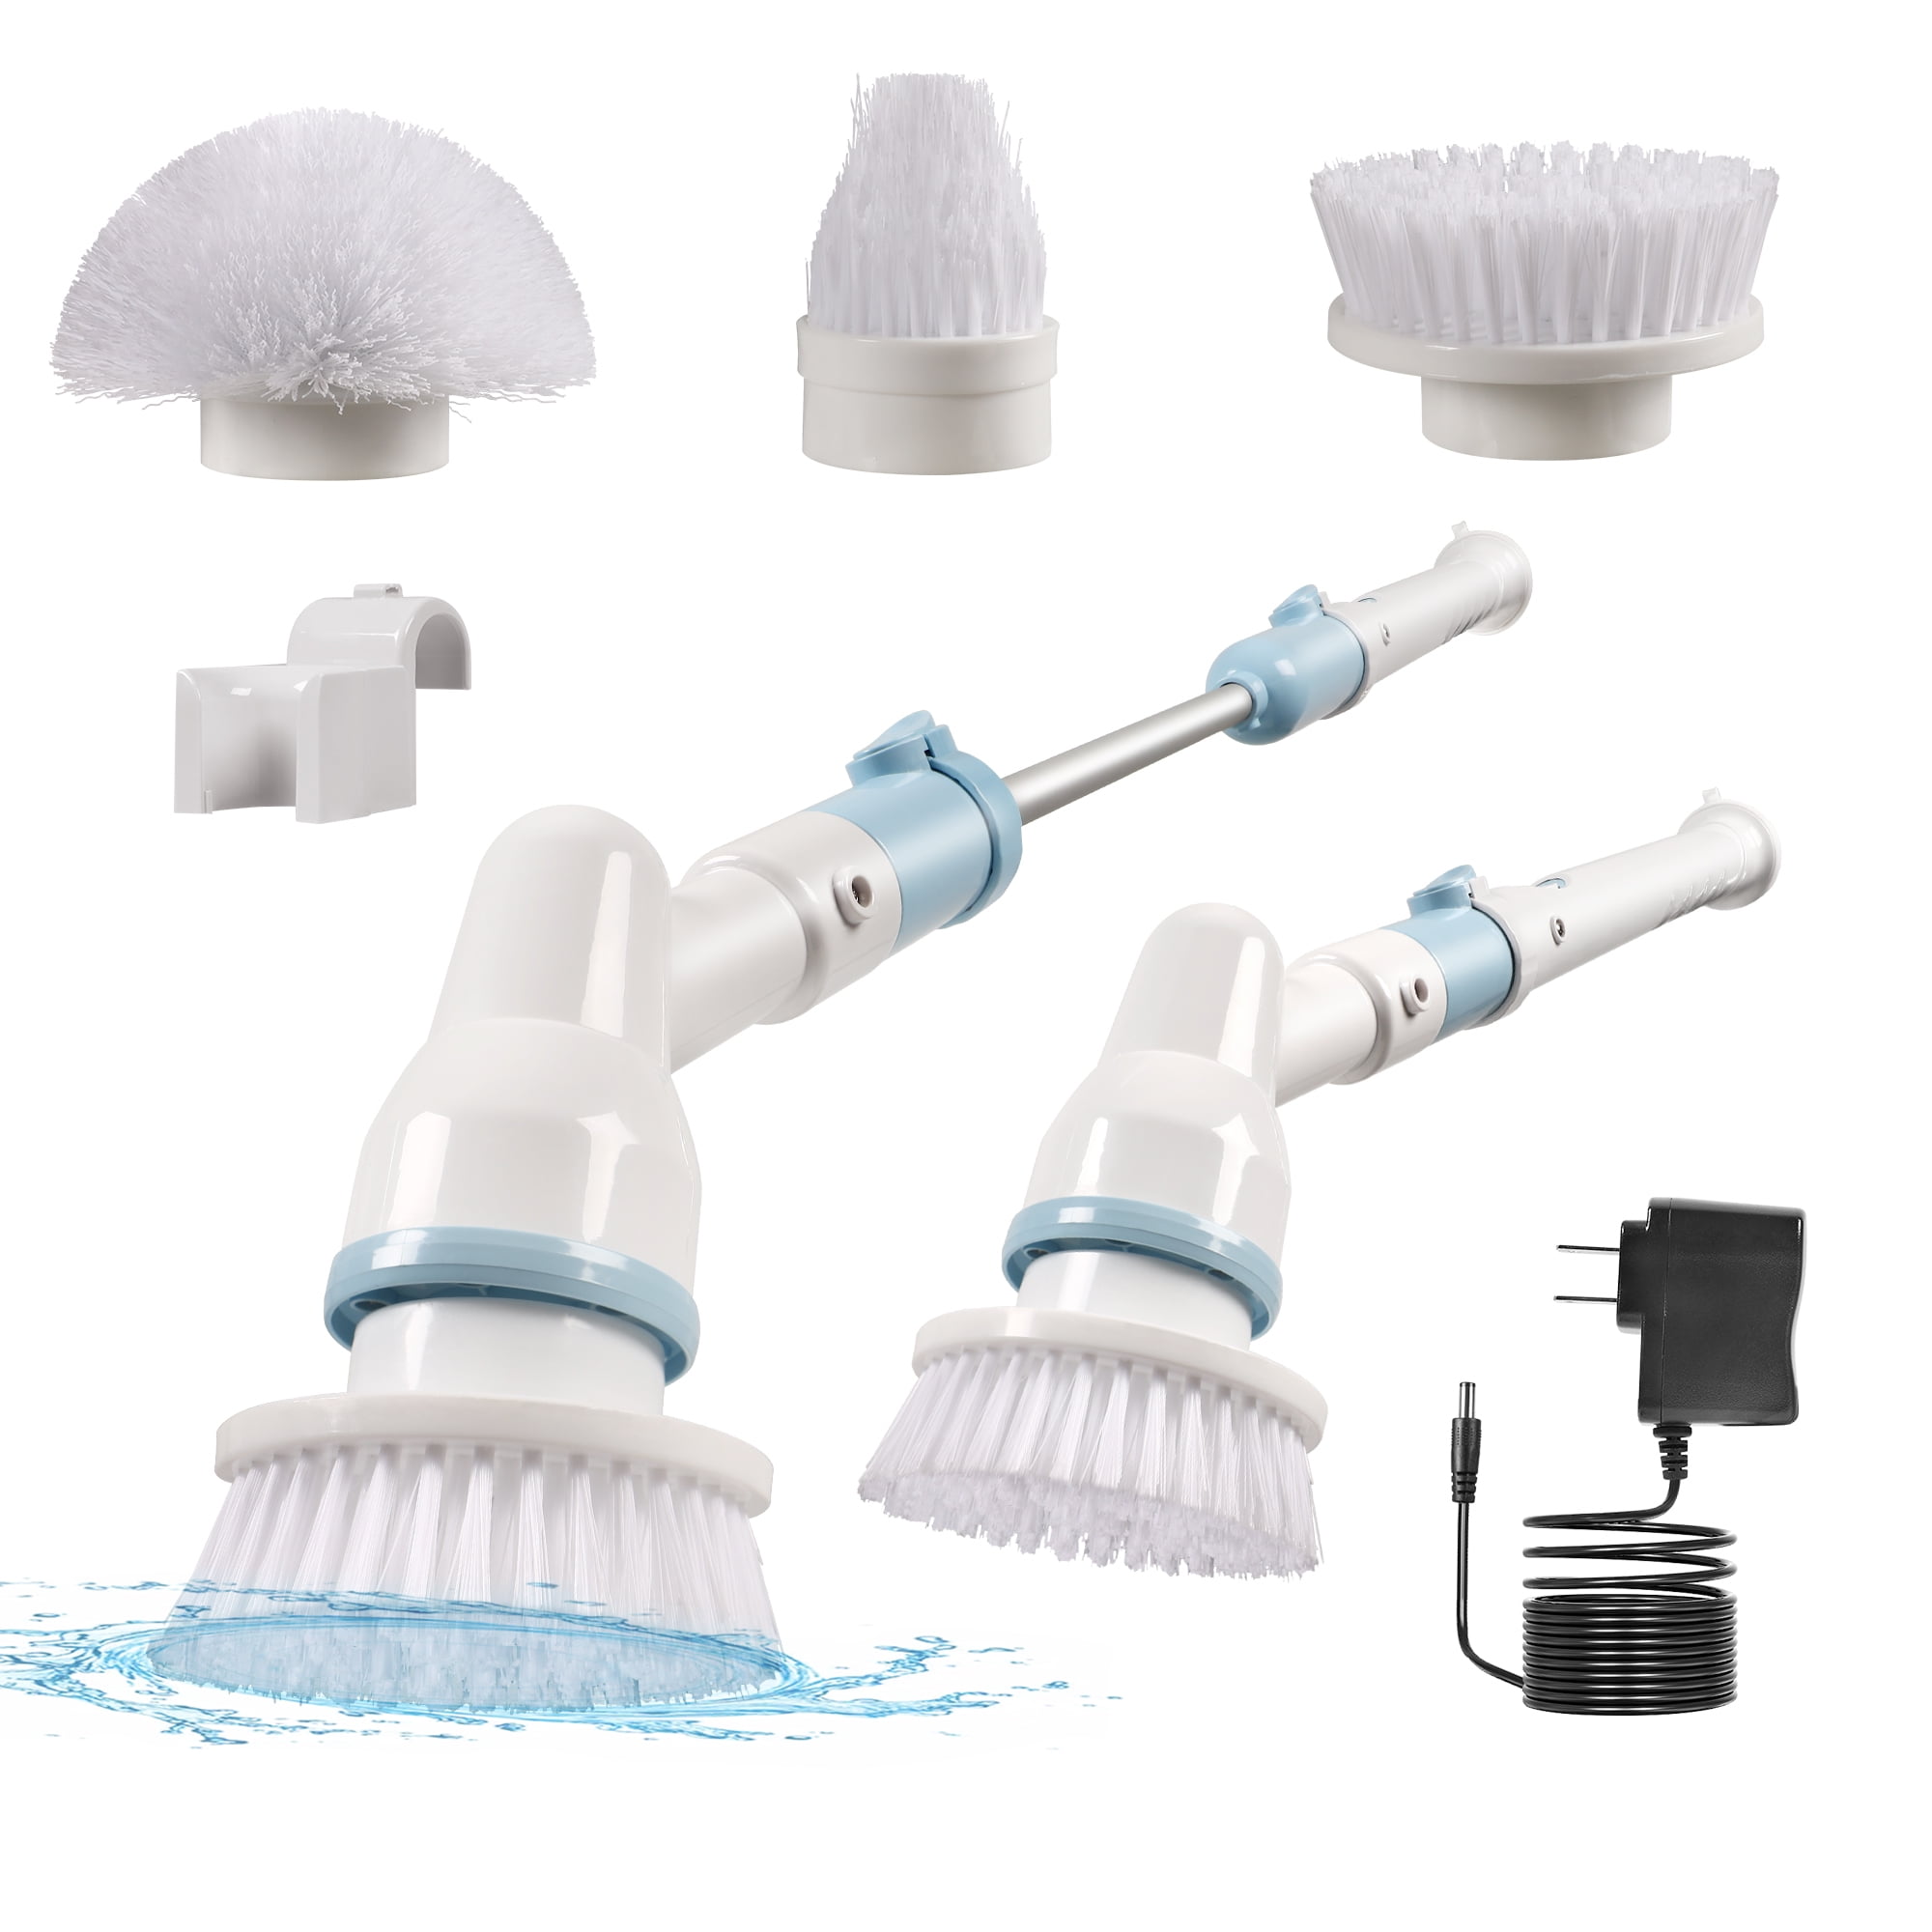 LovoIn Electric Spin Scrubber Cordless Rechargeable Multi-Purpose